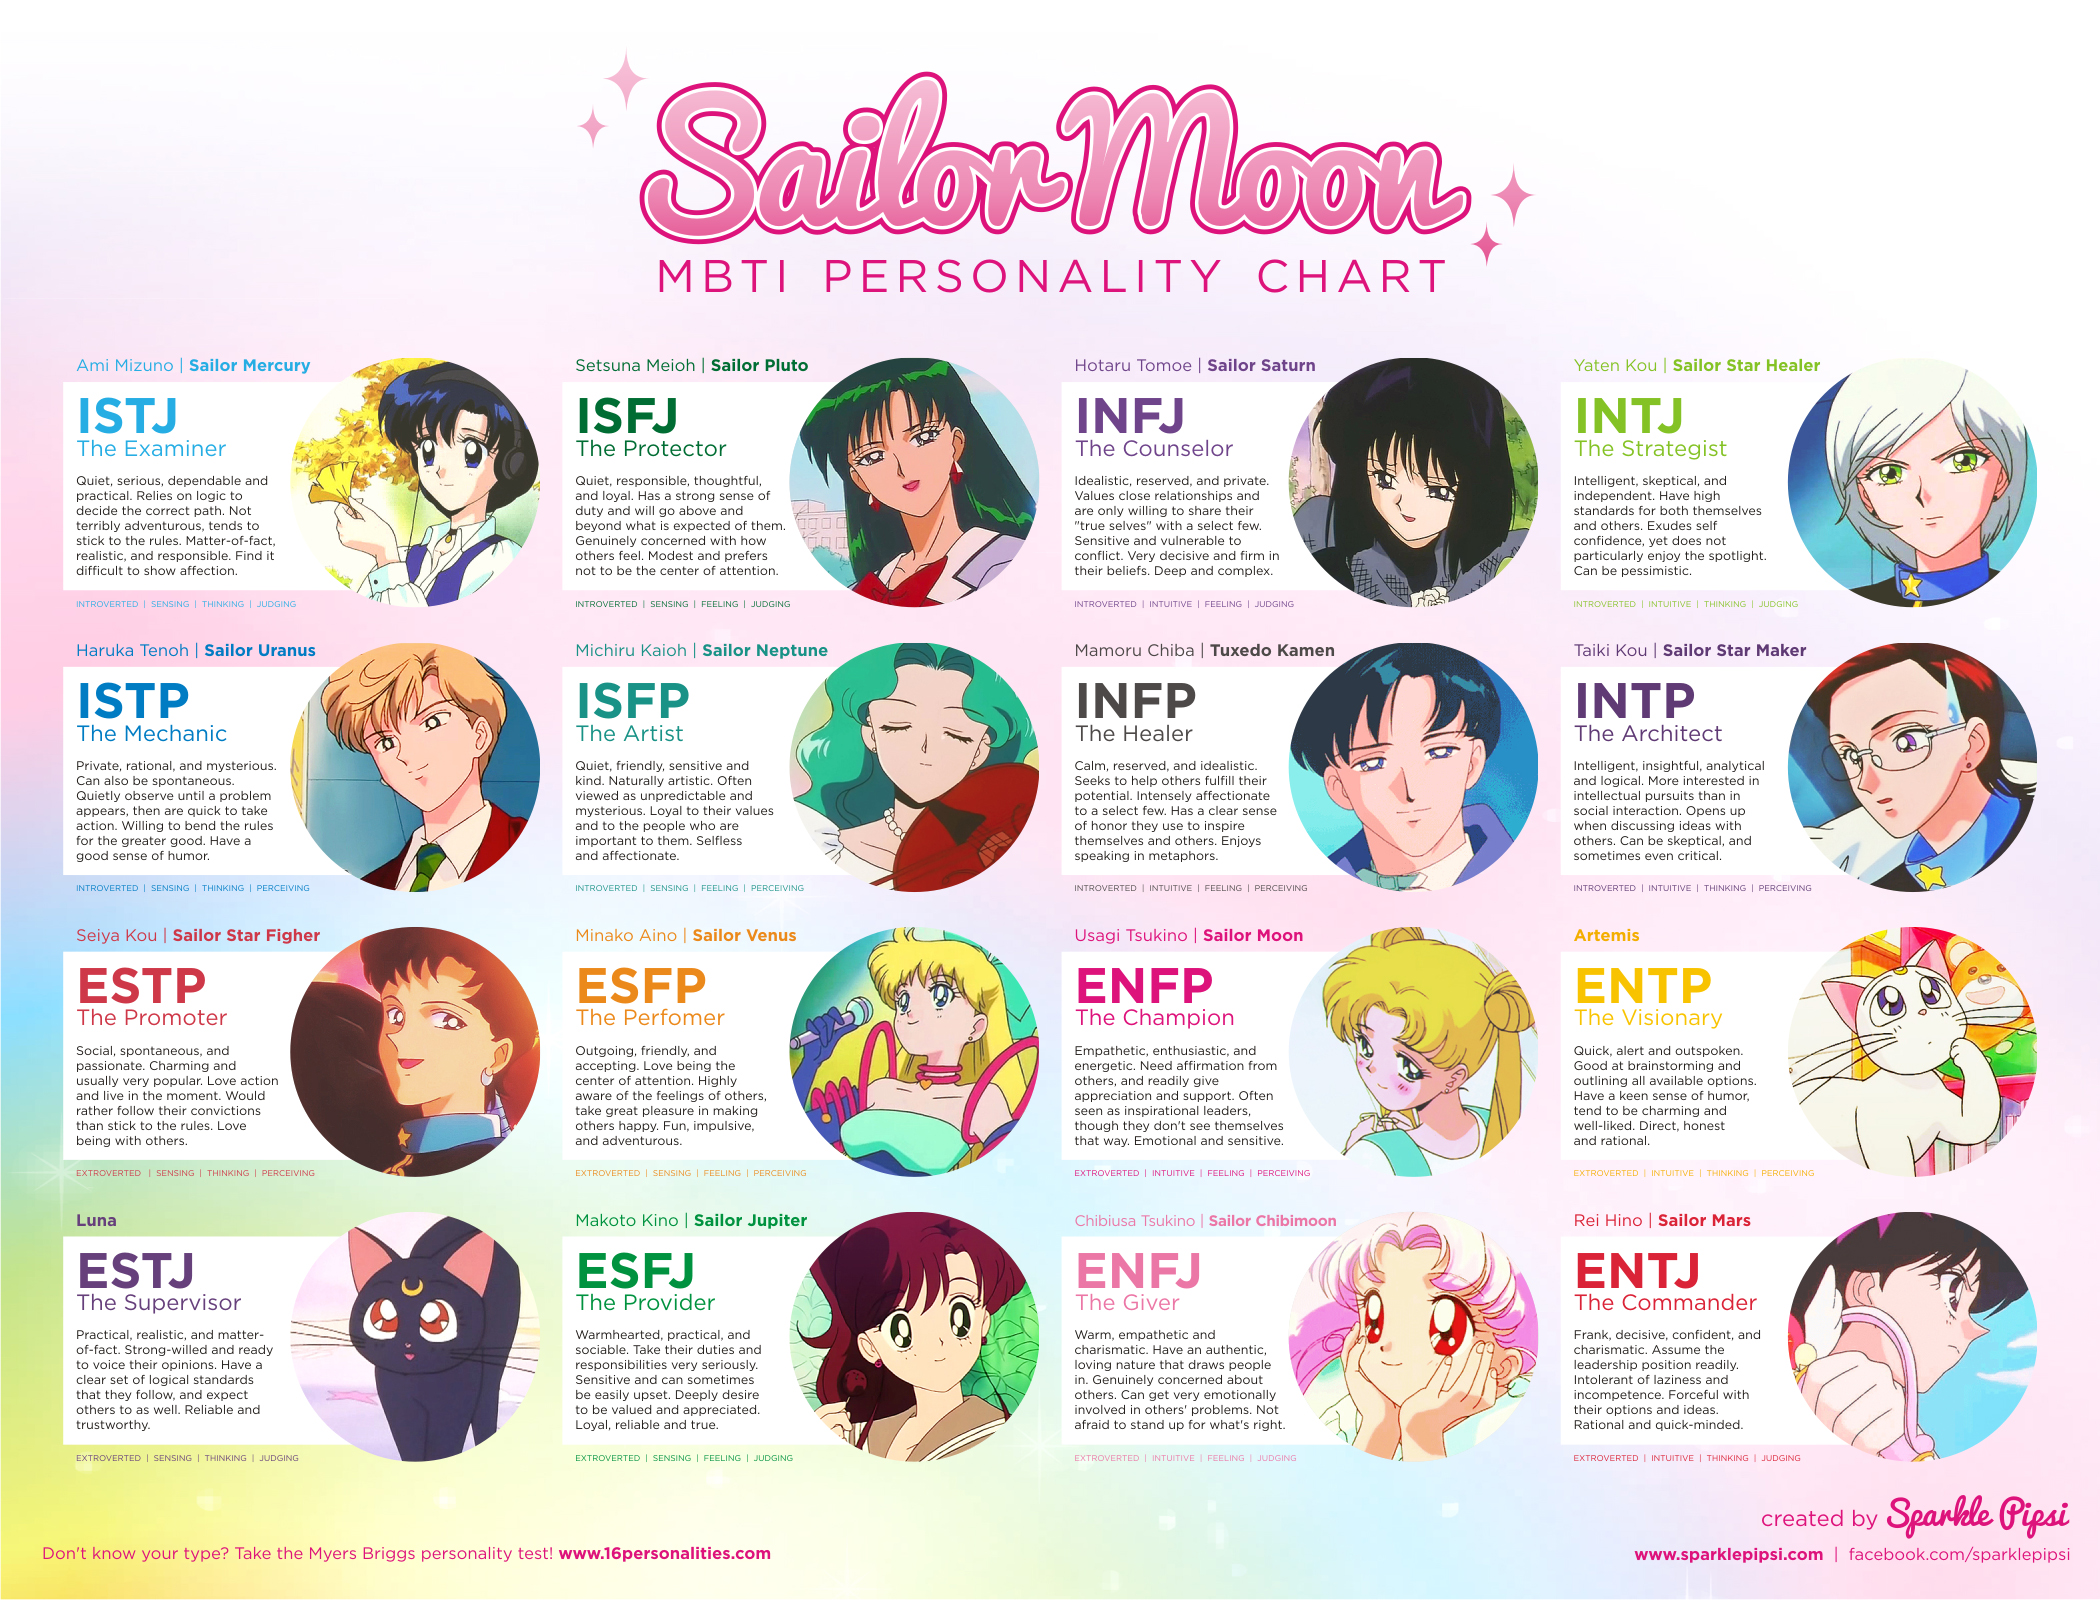 __sailor_moon_mbti_personality_chart___by_sparklepipsi-d71ih3l.jpg